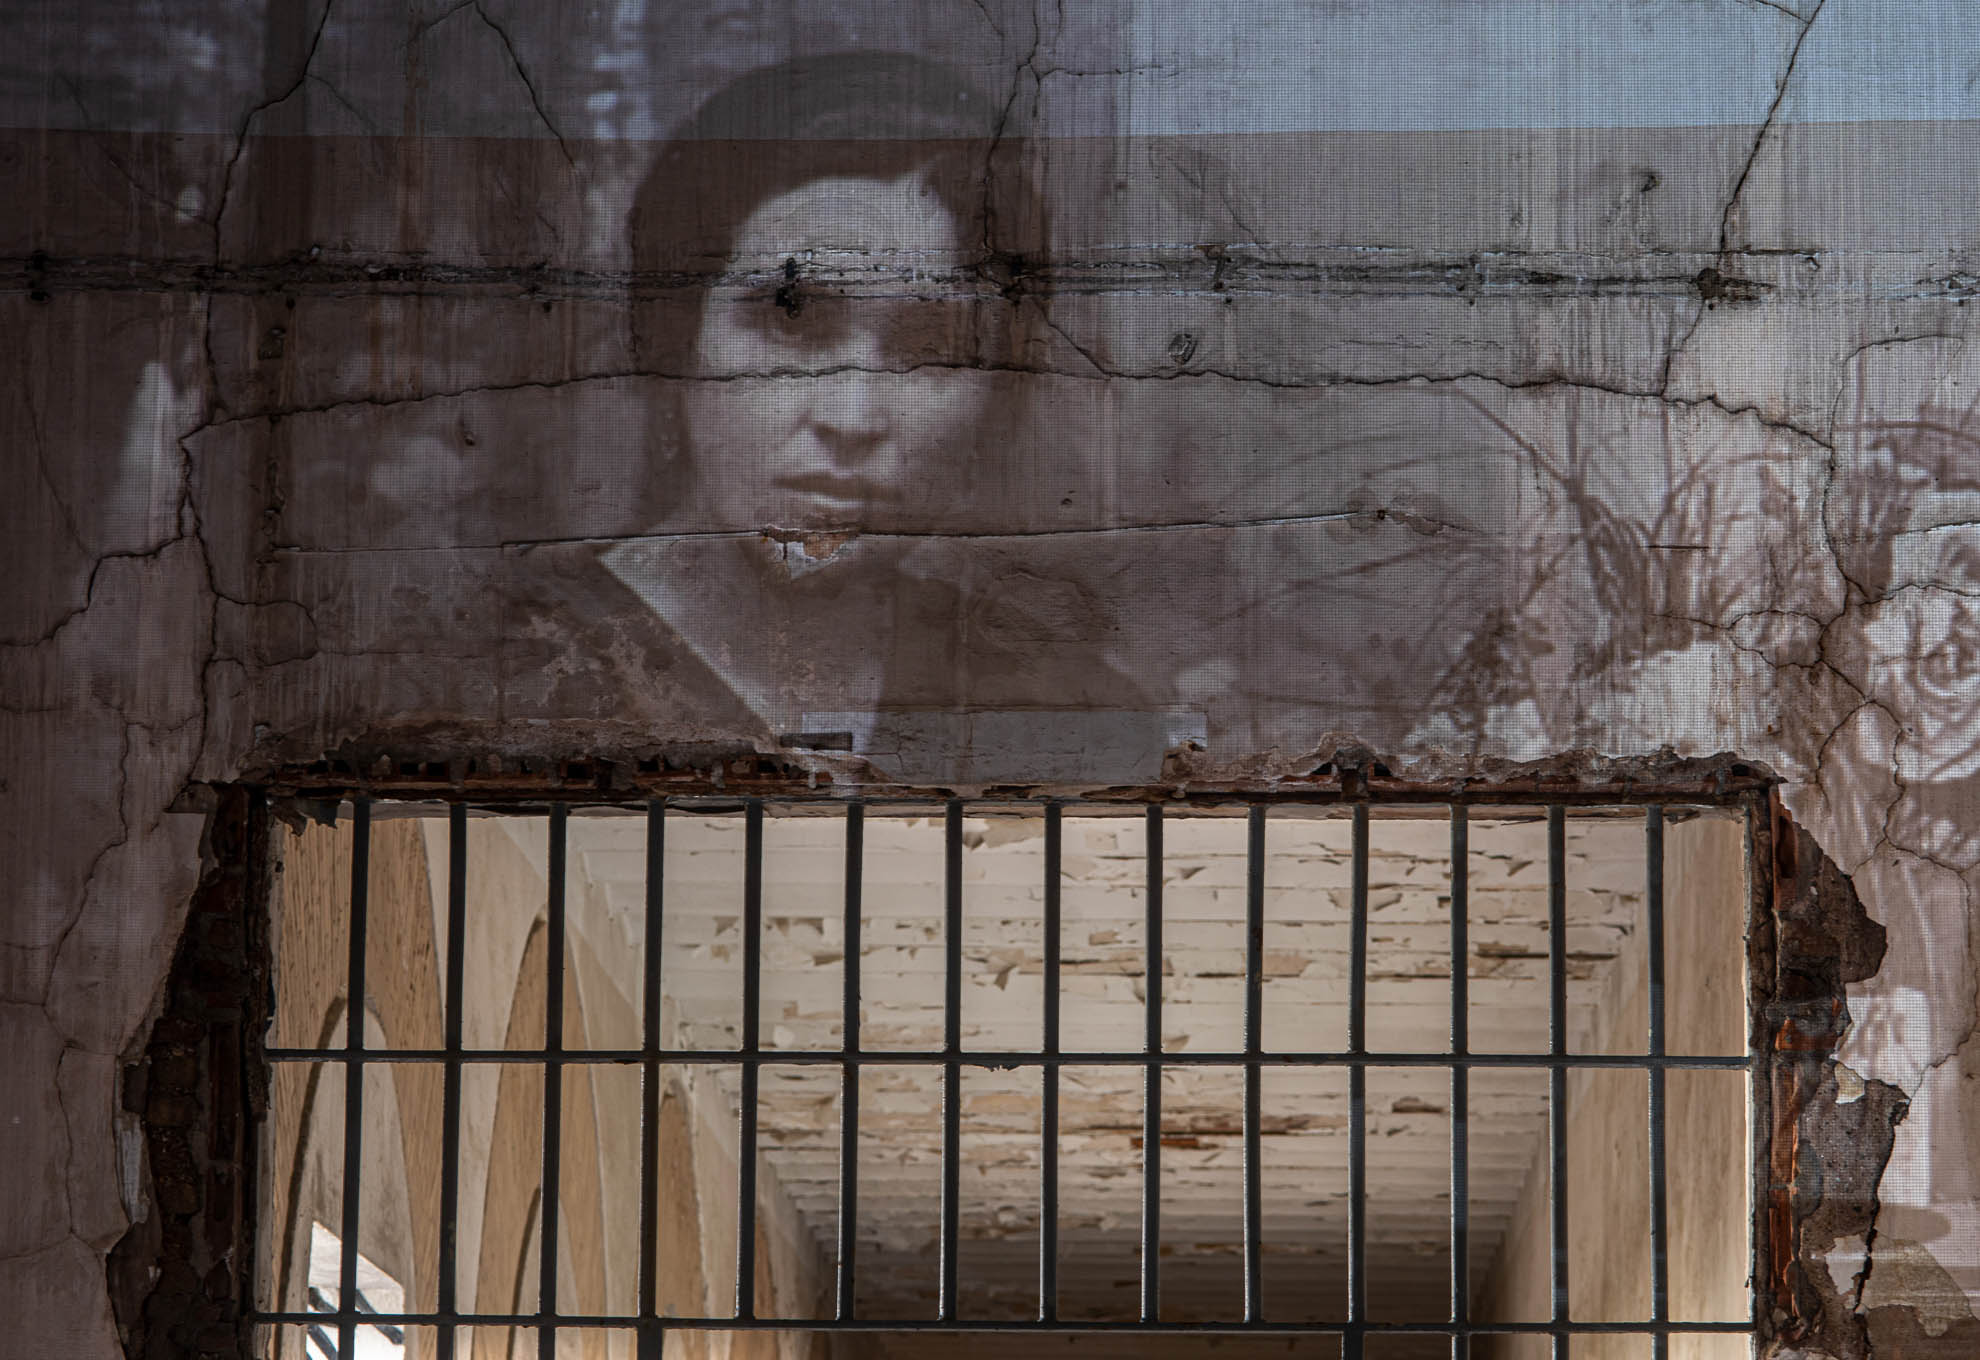 Projection of a photo of Balbina Sánchez, Huelva Provincial Prison, 2021. She was a primary school teacher in Villanueva de Los Castillejos. She was the only woman of the 21 teachers shot in the province. Catalina Gómez, one of her former students, still has photographs and letters she sent to her in prison.